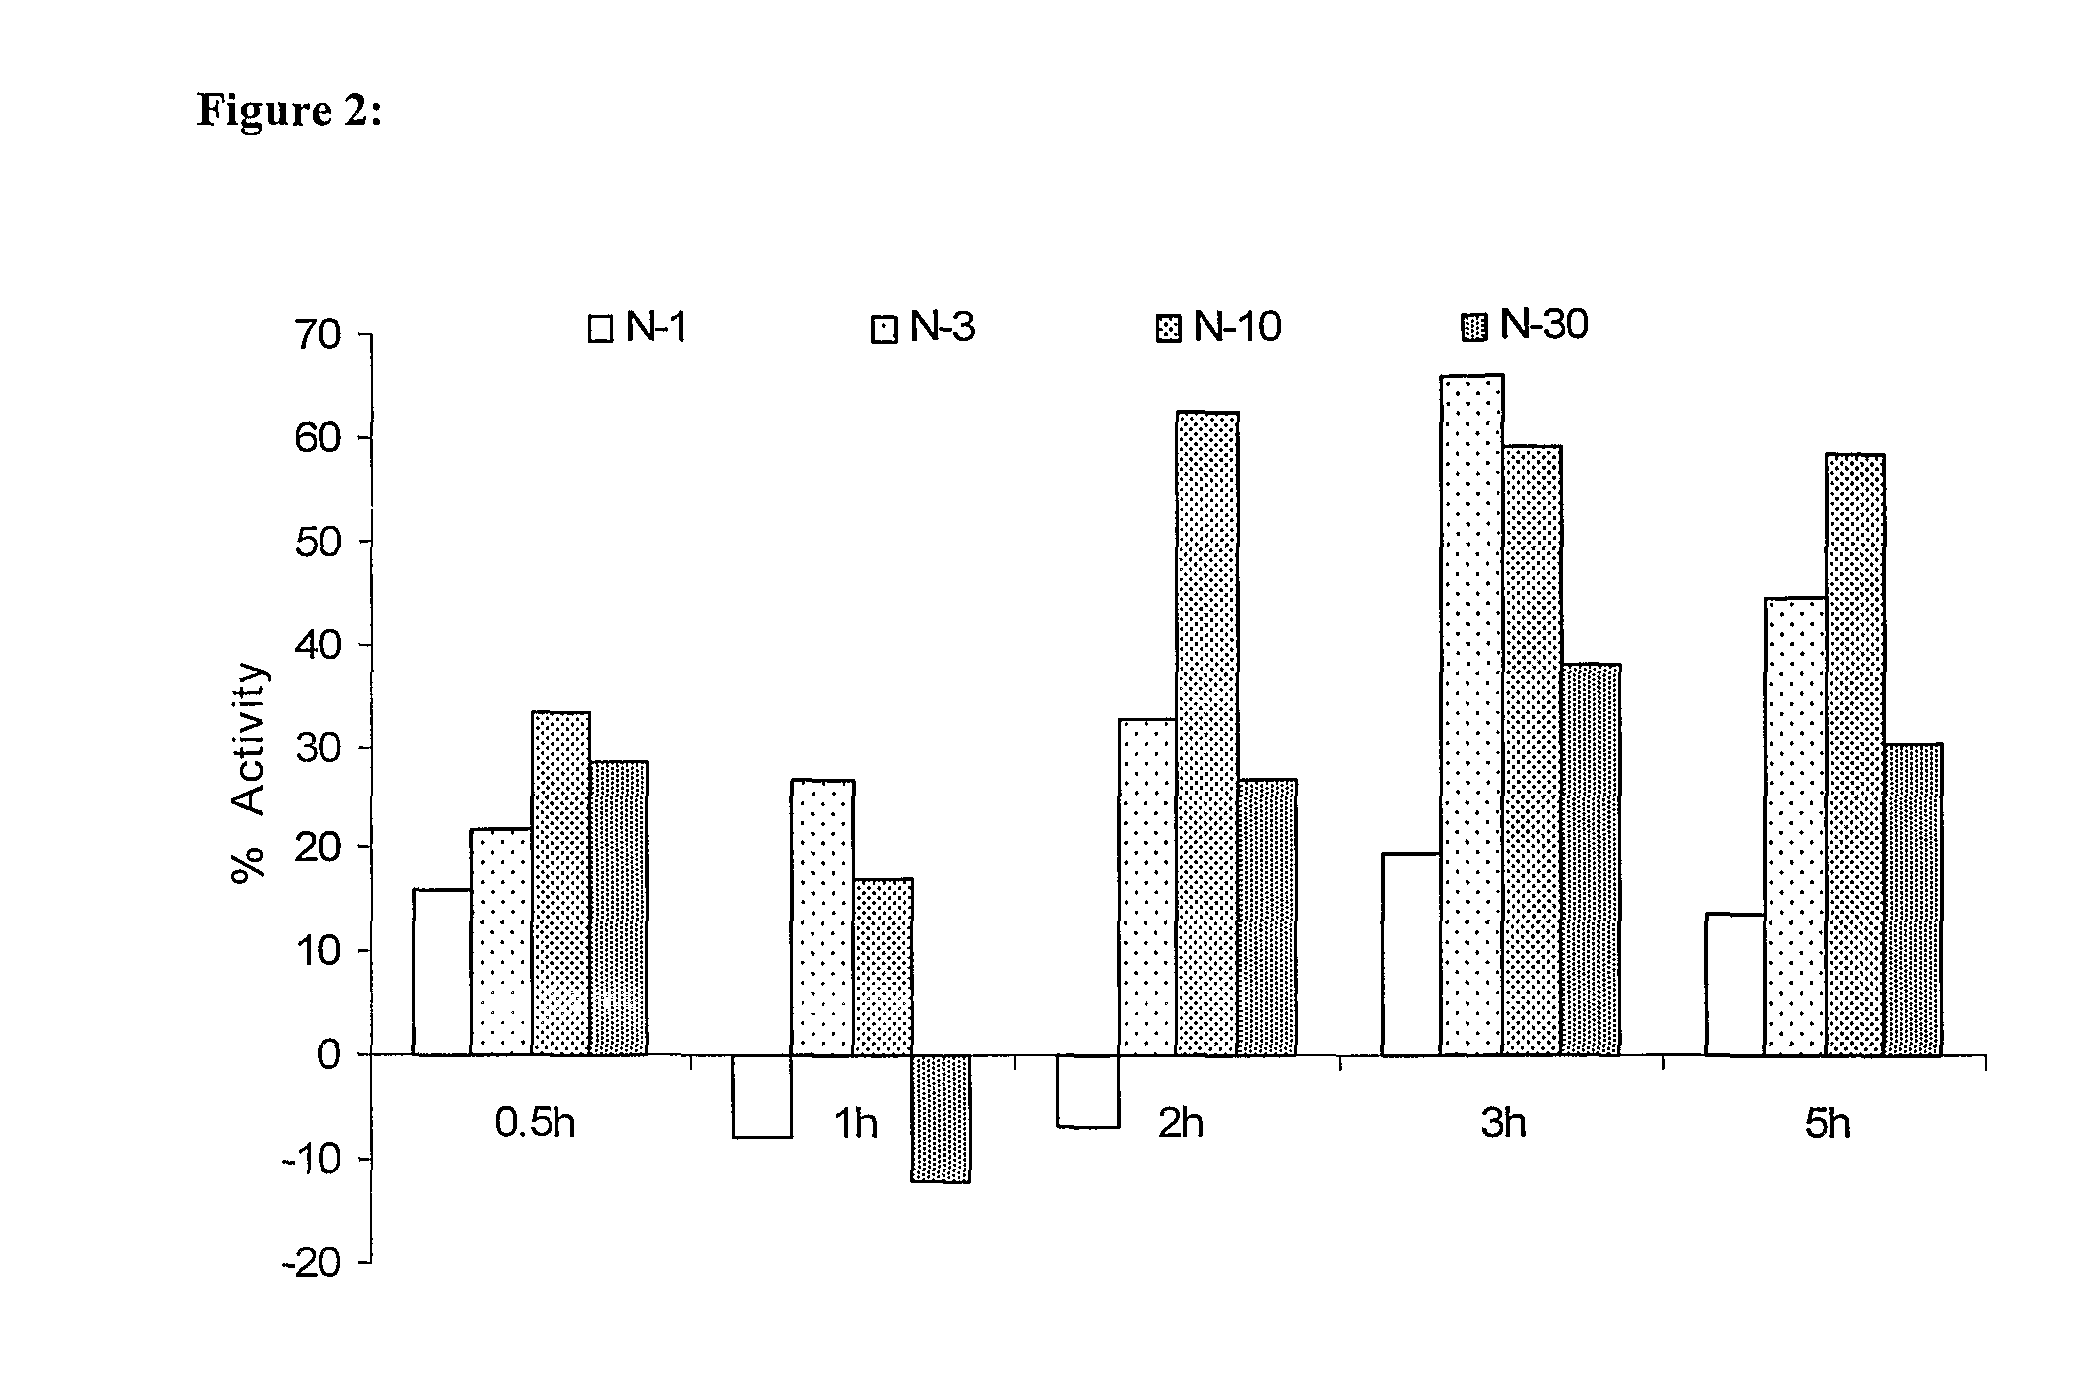 Novel low dose pharmaceutical compositions comprising nimesulide, preparation and use thereof